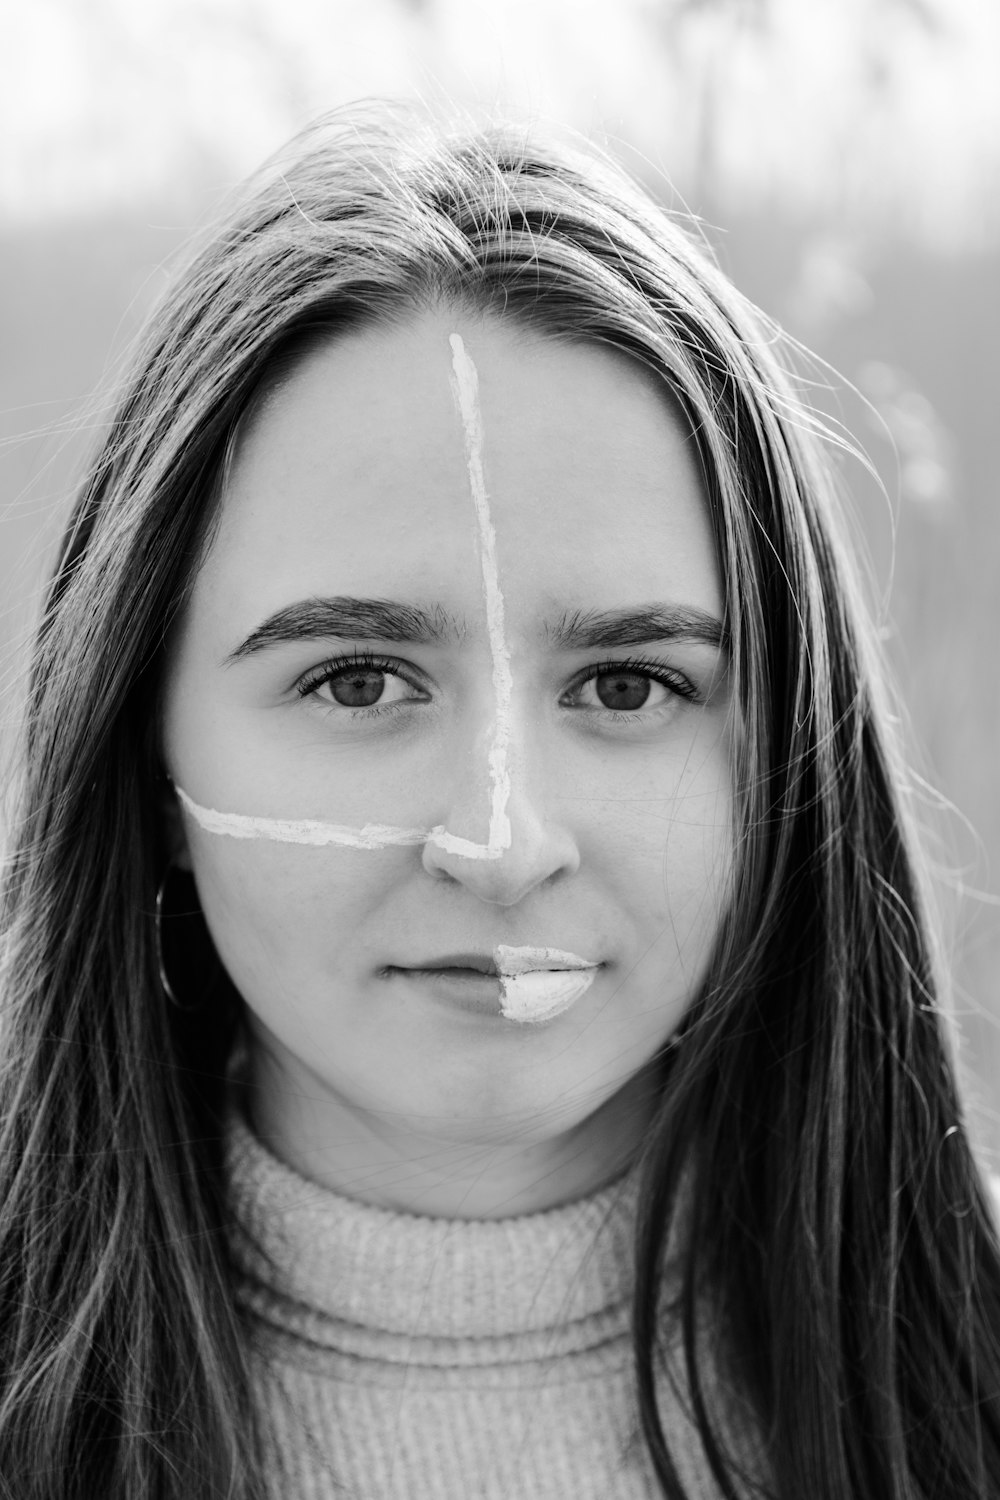 grayscale photo of woman with white powder on her face